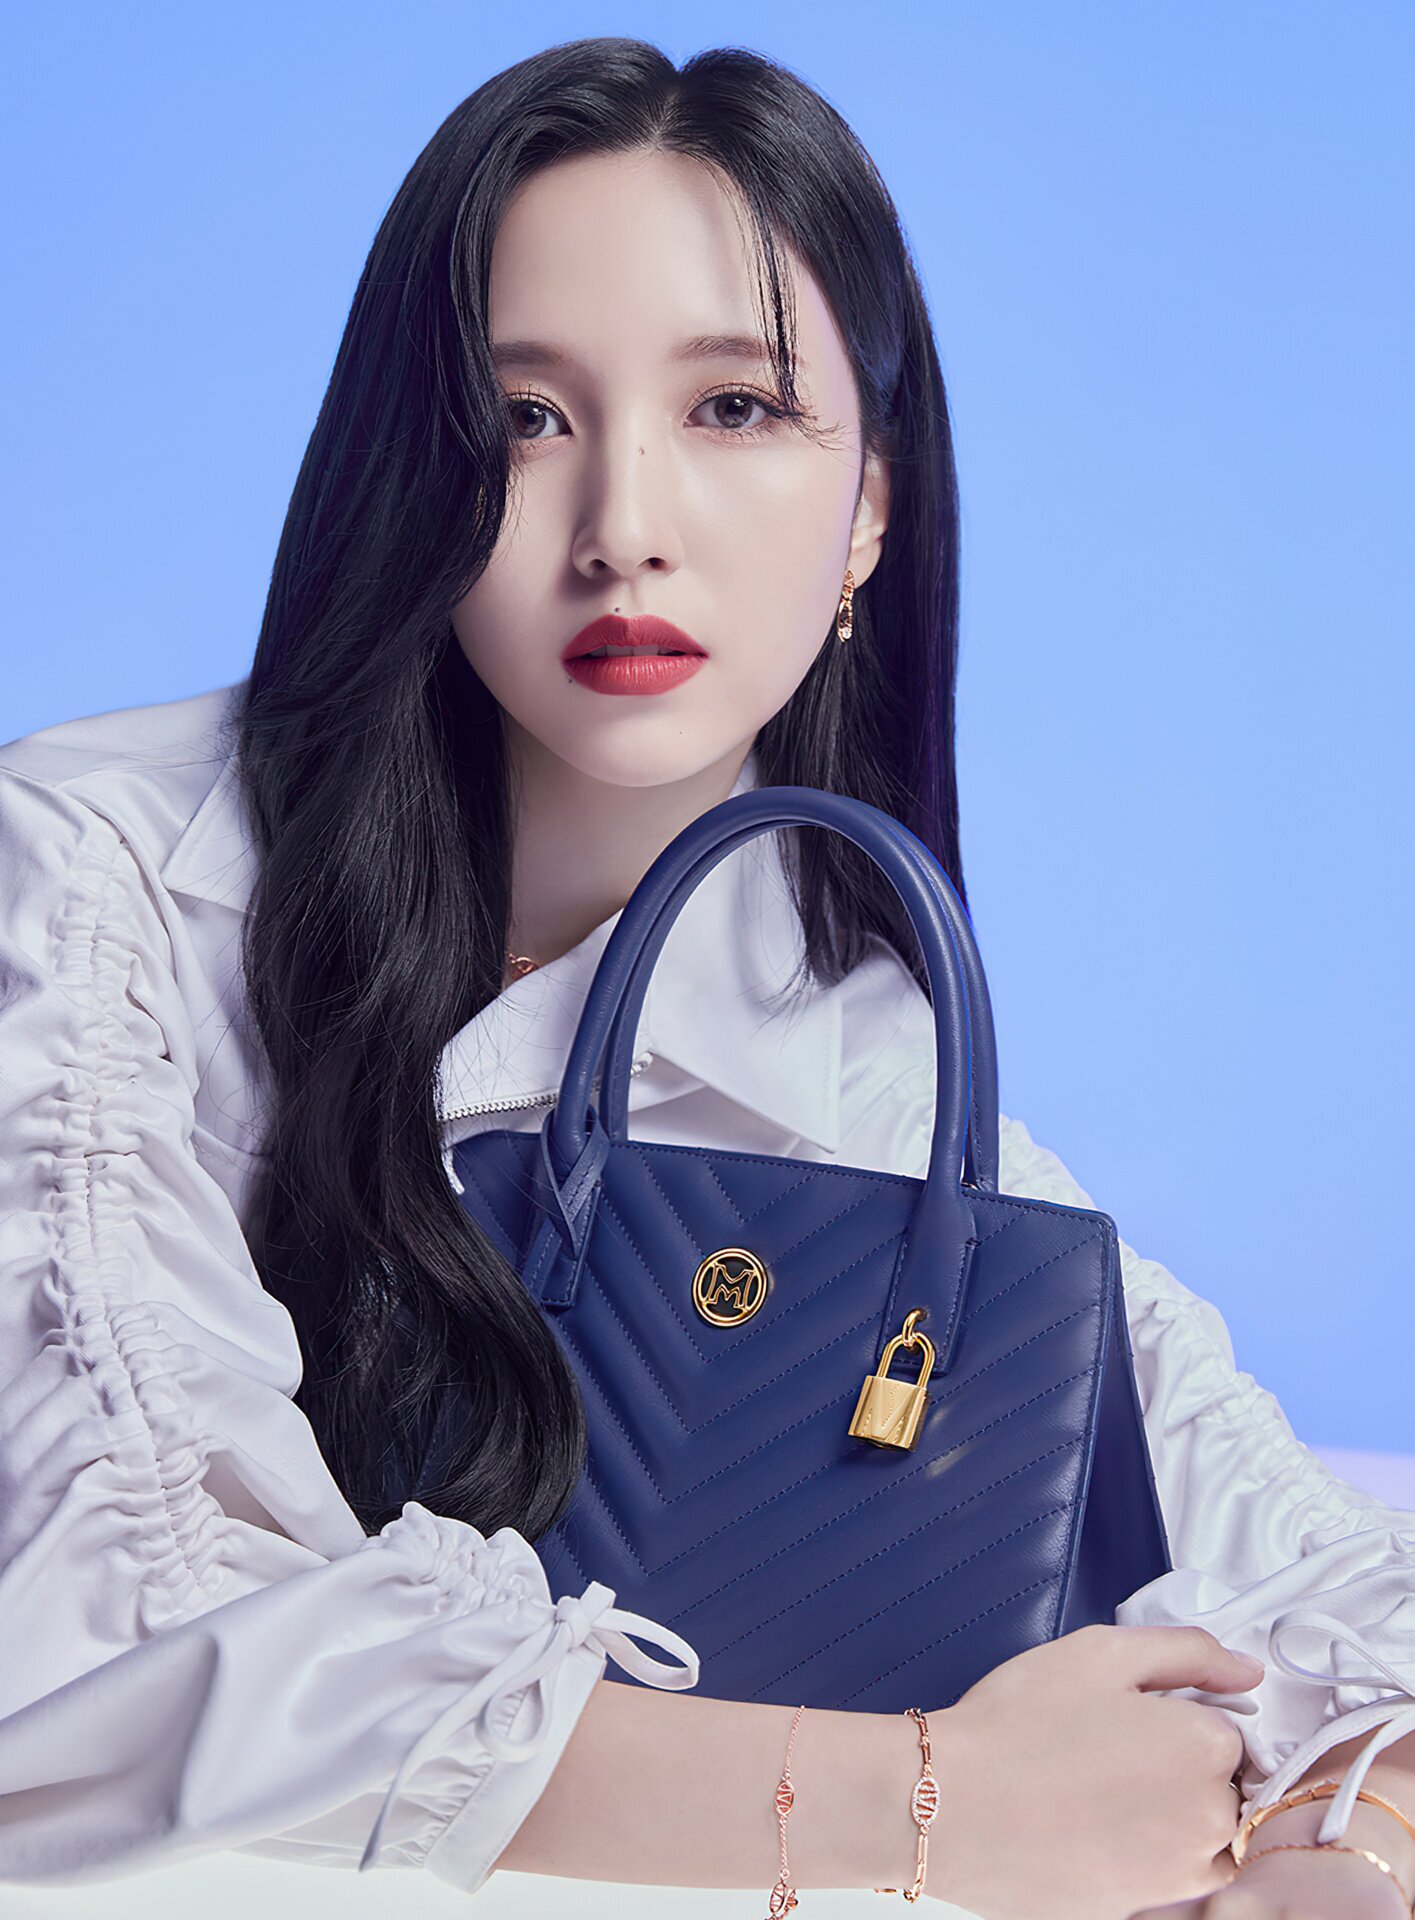 TWICE Mina for METROCITY 2022 FW 'New Tote' Collection